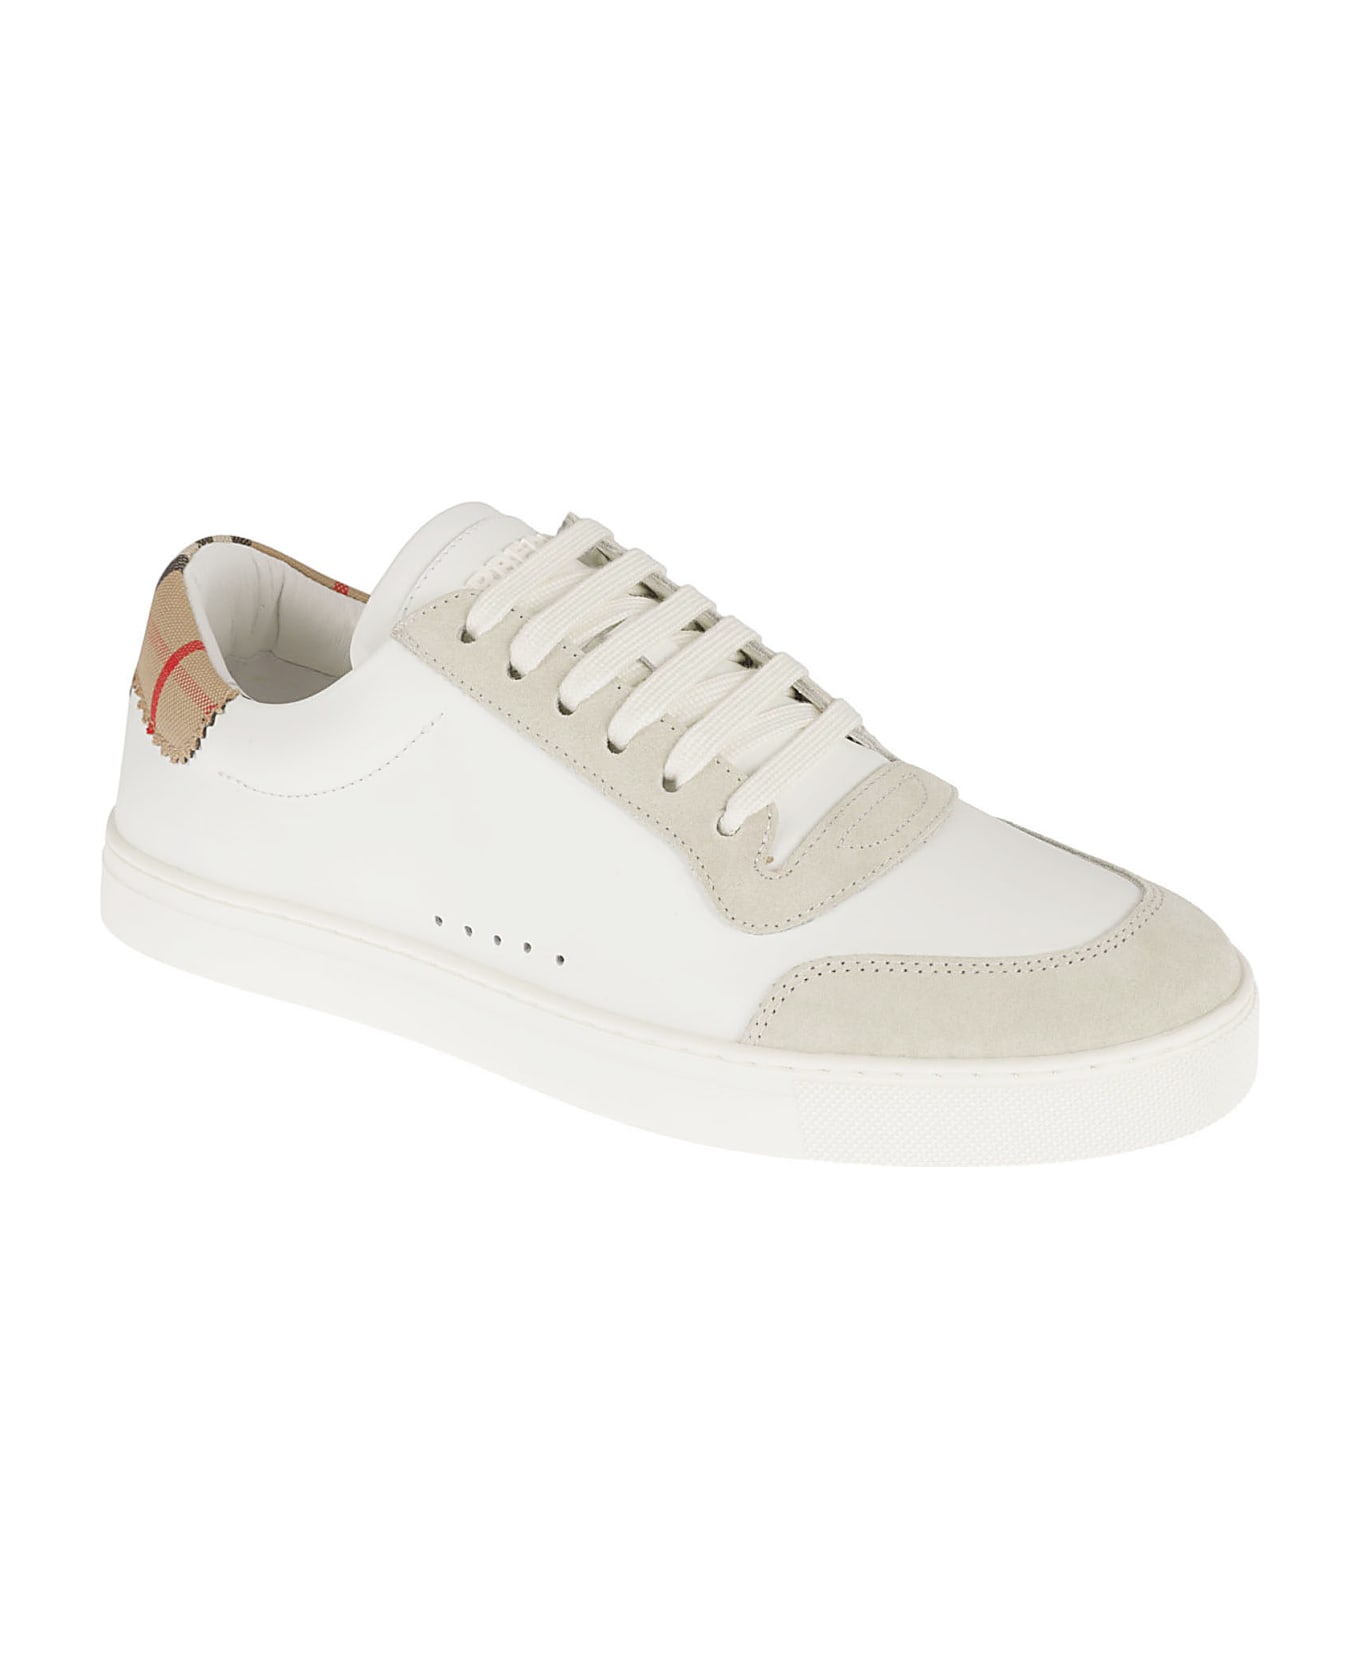 Burberry Robin Sneakers - Neutral White